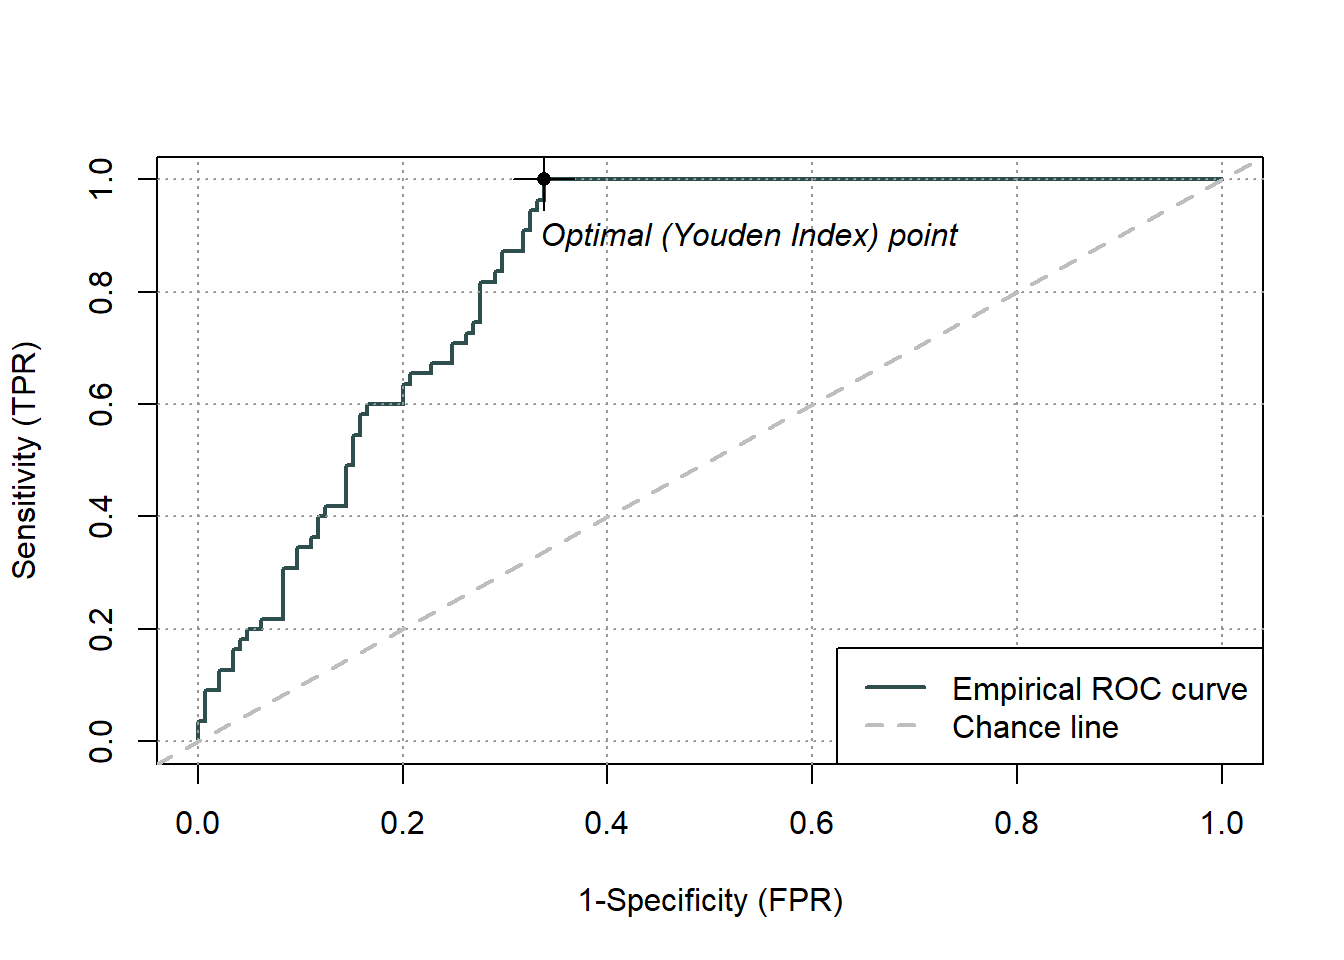 Sensitivity (TPR) ploted versus 1-Specificity (FPR) and the y=x line, where the optimal threshold is also indicated